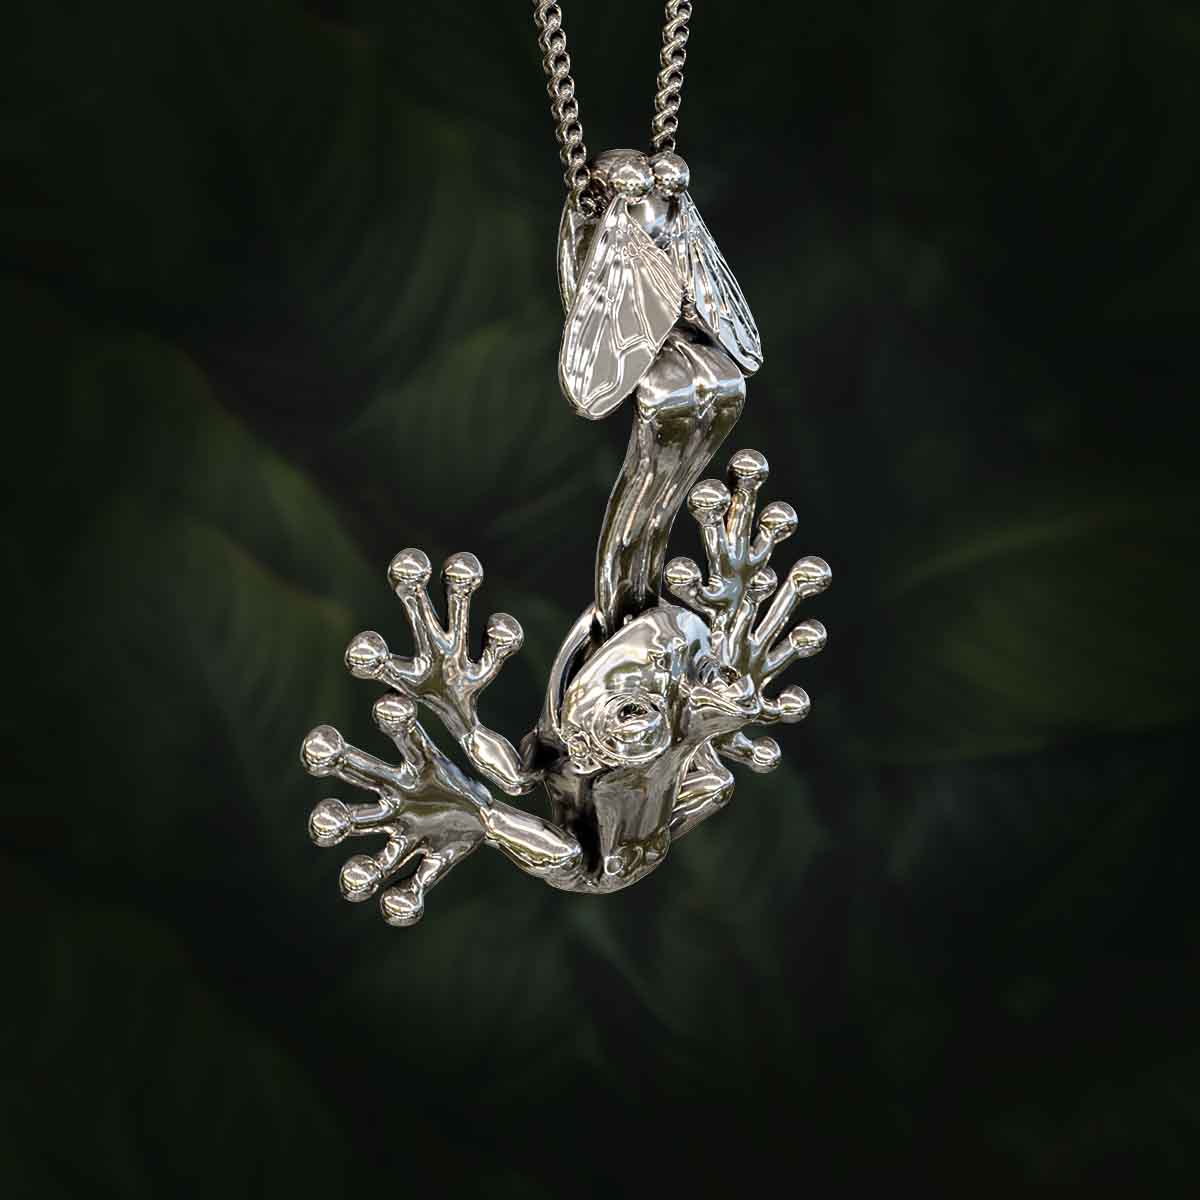 Main-Image-White-Gold-Rhodium-Finish-Frog-Catching-Fly-With-Tongue-Pendant-Jewelry-For-Necklace